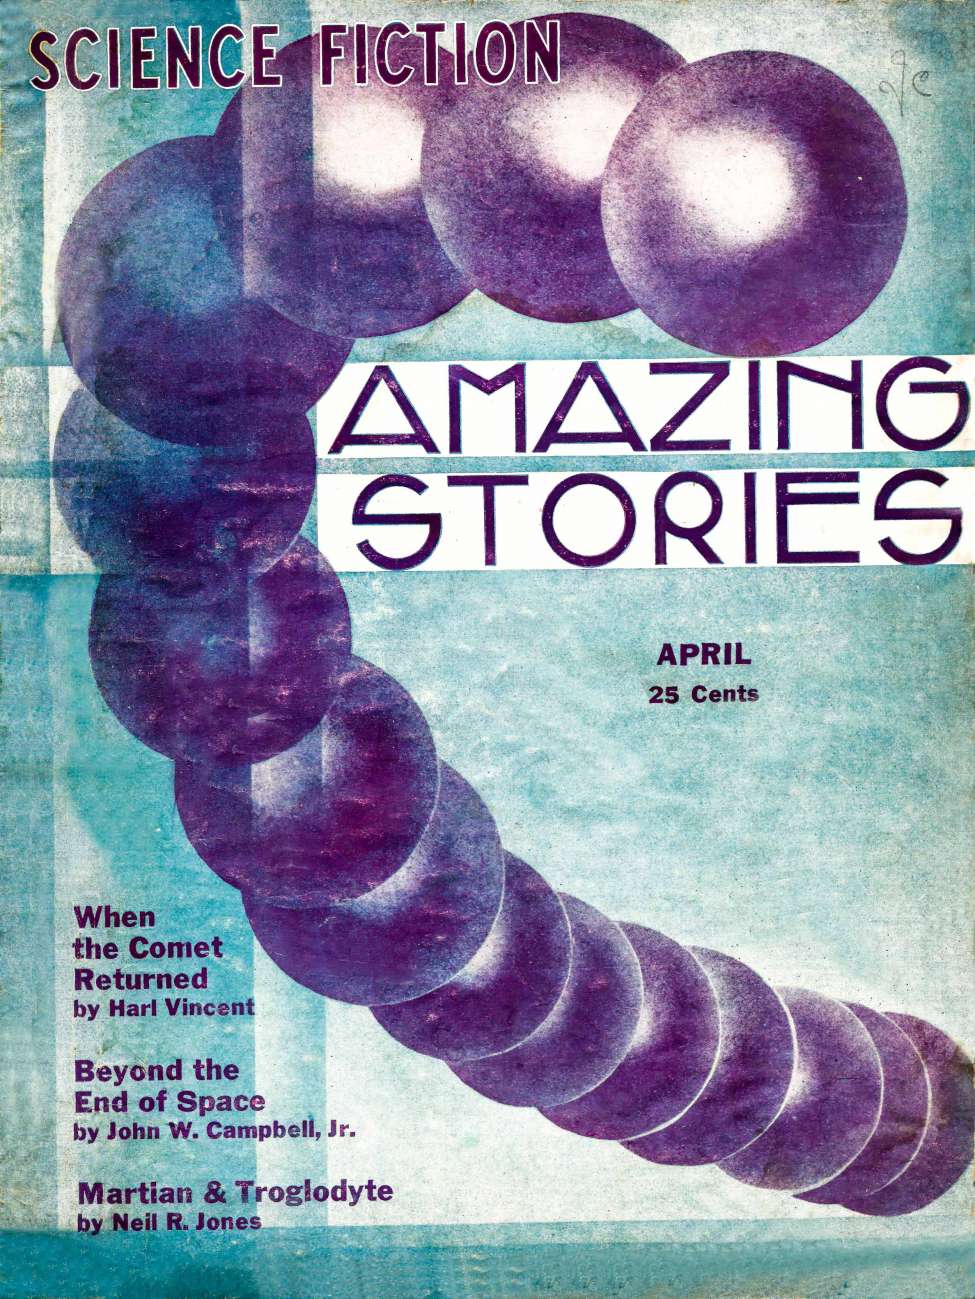 Comic Book Cover For Amazing Stories v8 1 - When the Comet Returned - Harl Vincent